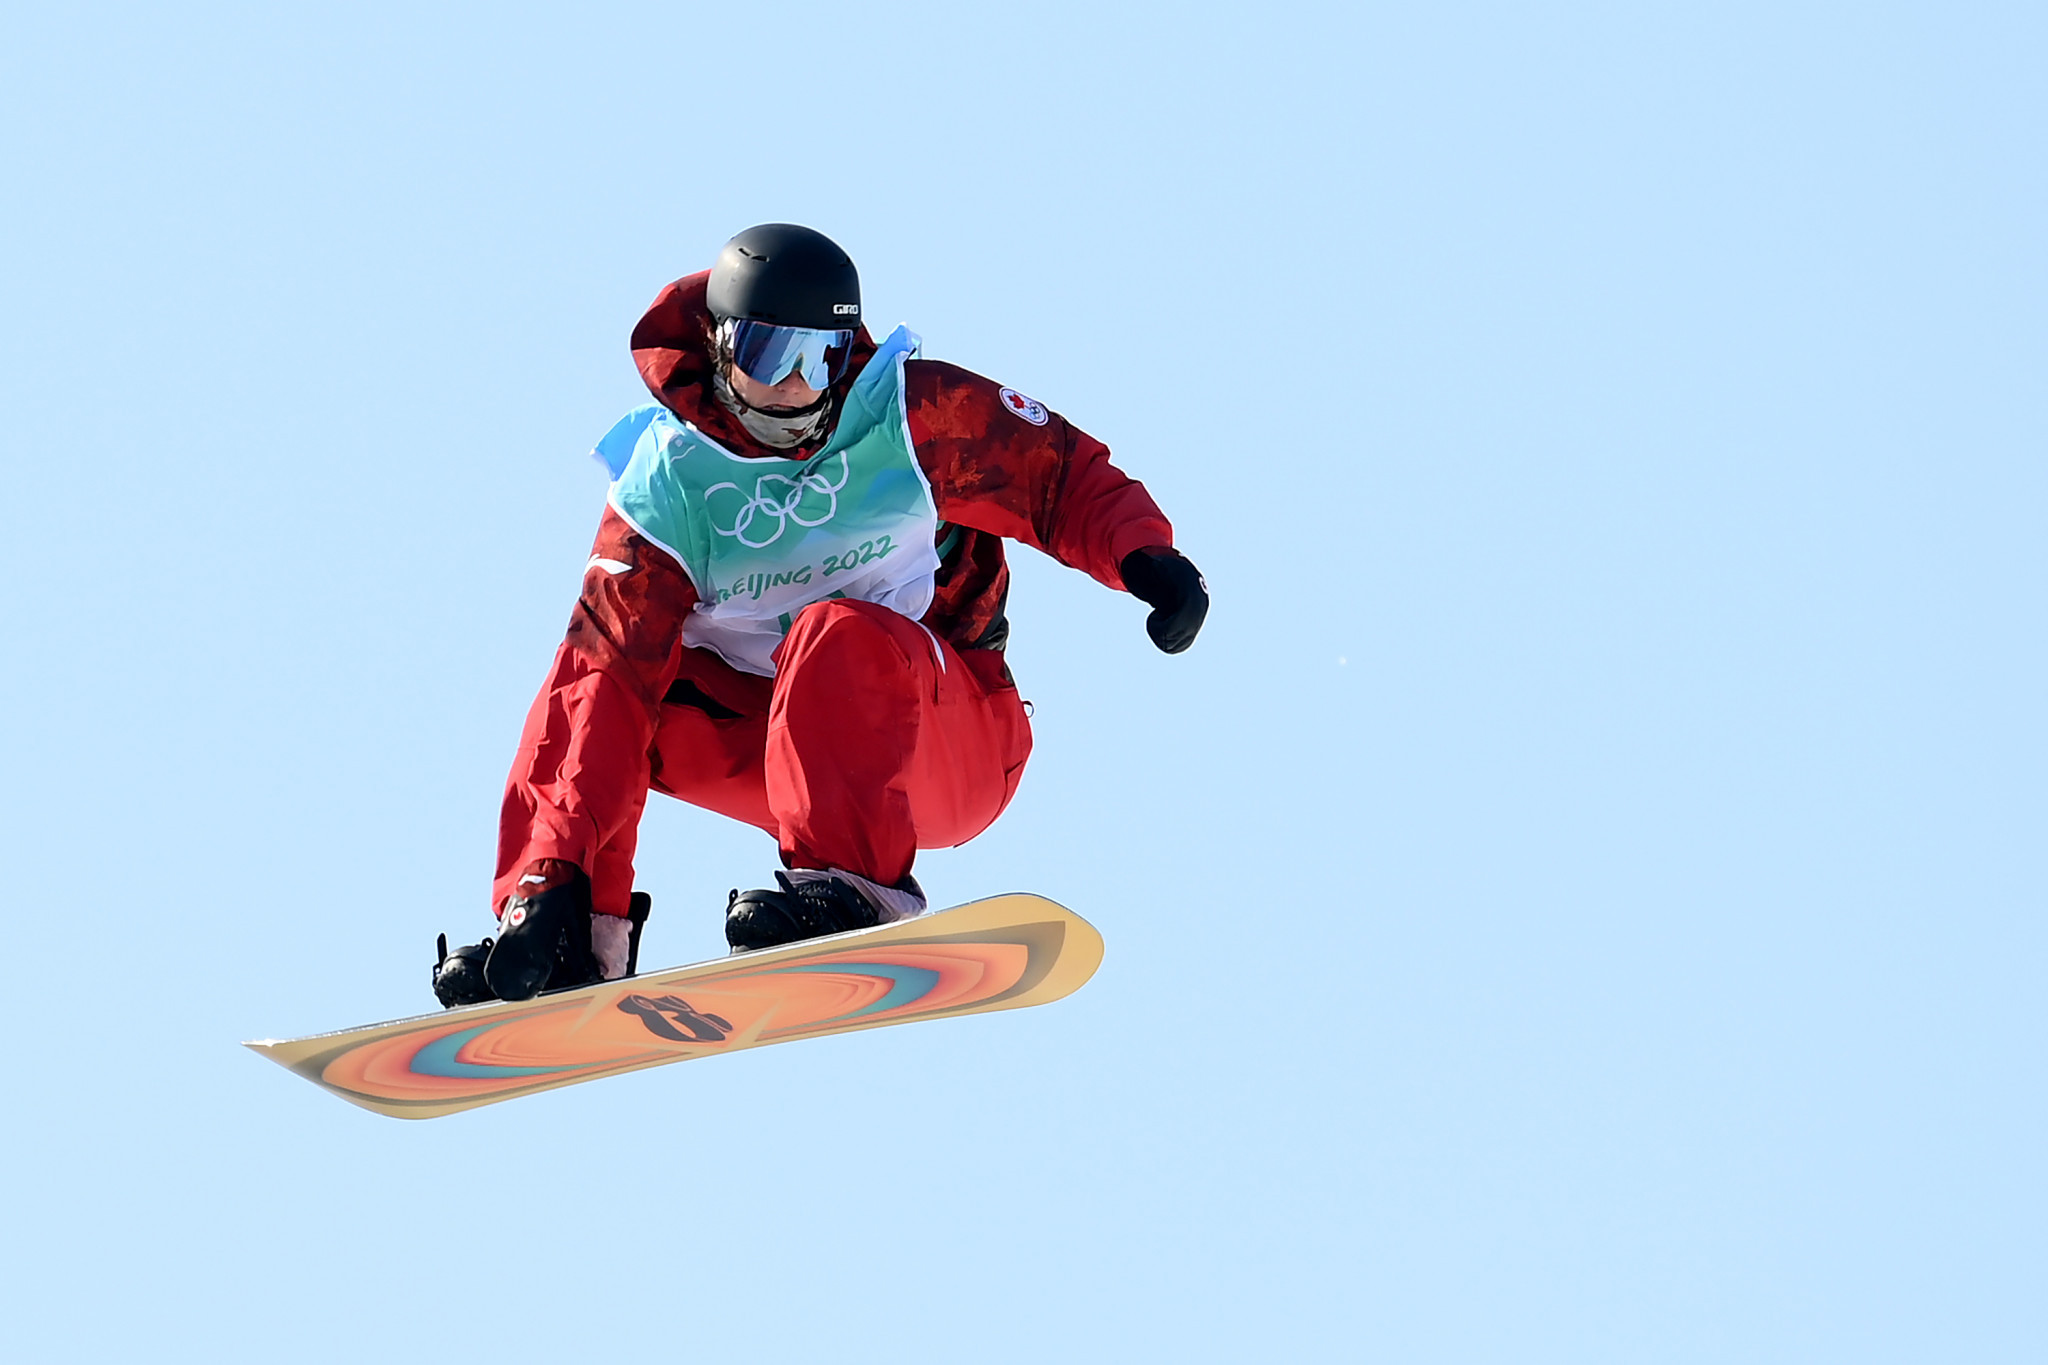 Canada's Darcy Sharpe topped a Snowboard World Cup podium for the first time since 2015 in Calgary ©Getty Images